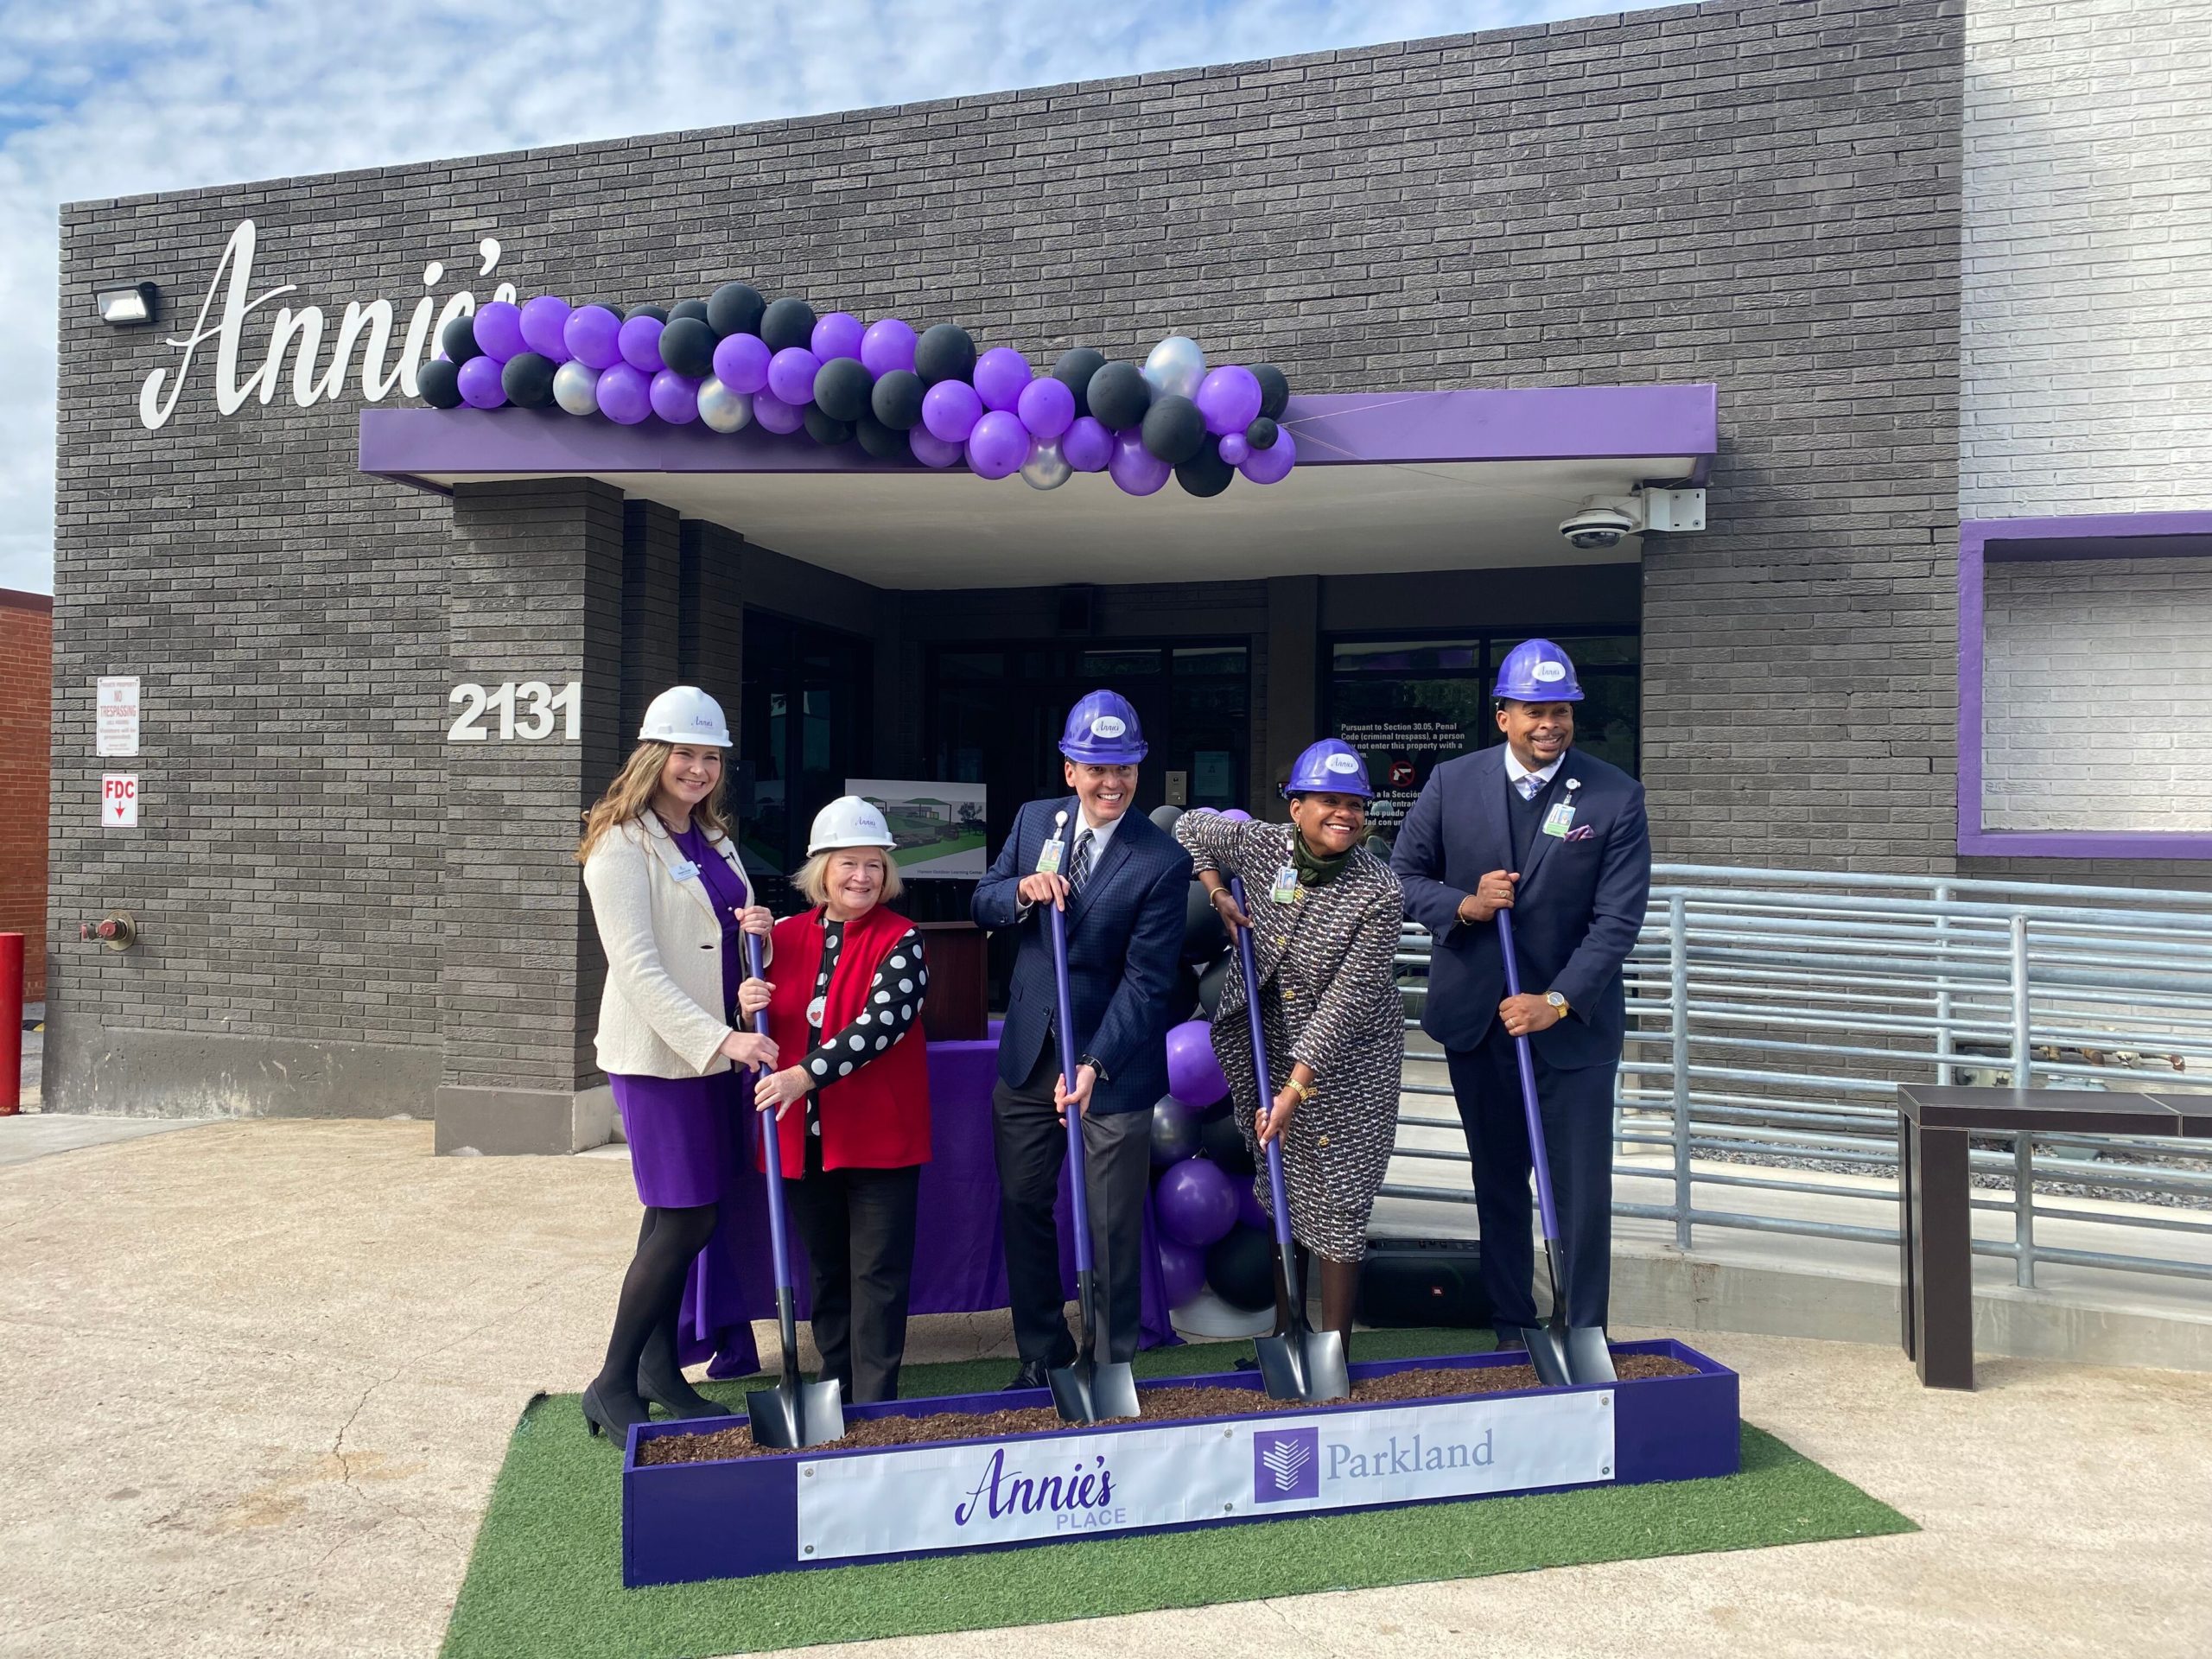 From left to right, two women, one man, another woman, and a man dig into a rectangular planter of dirt in front of a grey and purple building. A sign says "Annie's Place."